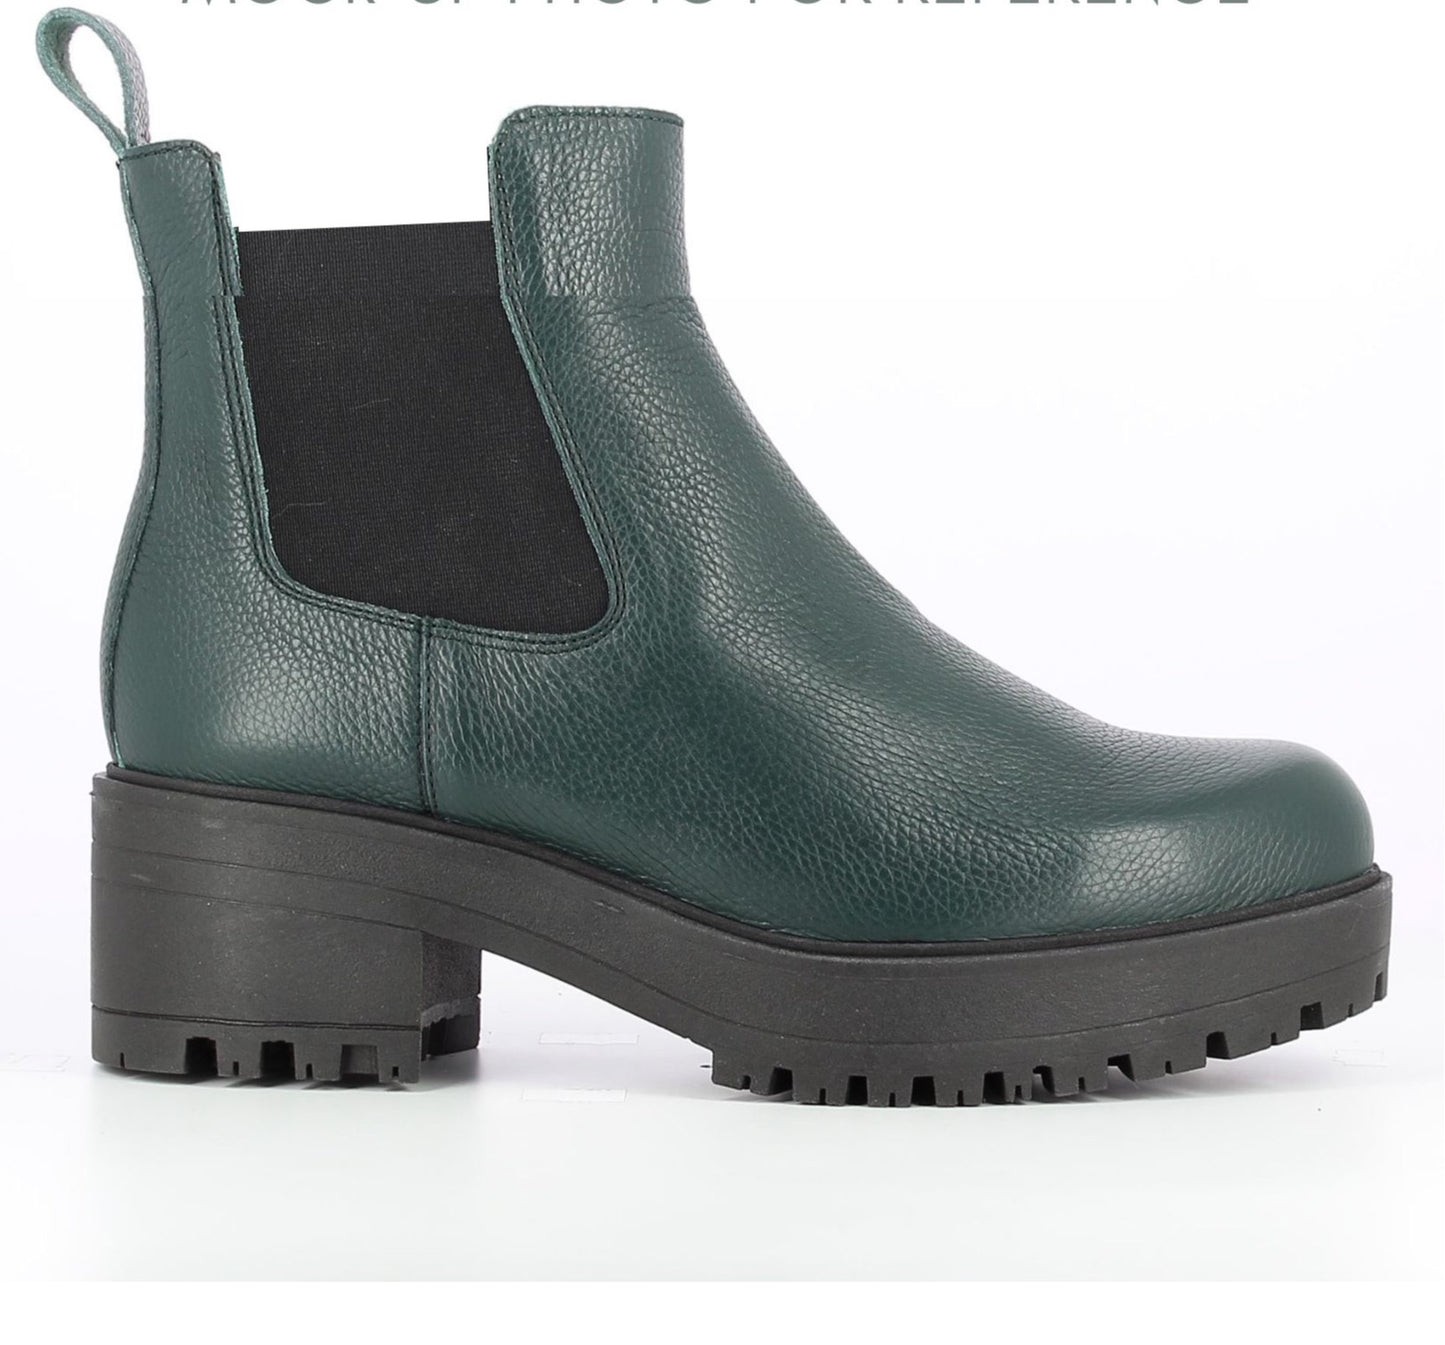 forest green Chelsea boot with a 1 inch platforn 